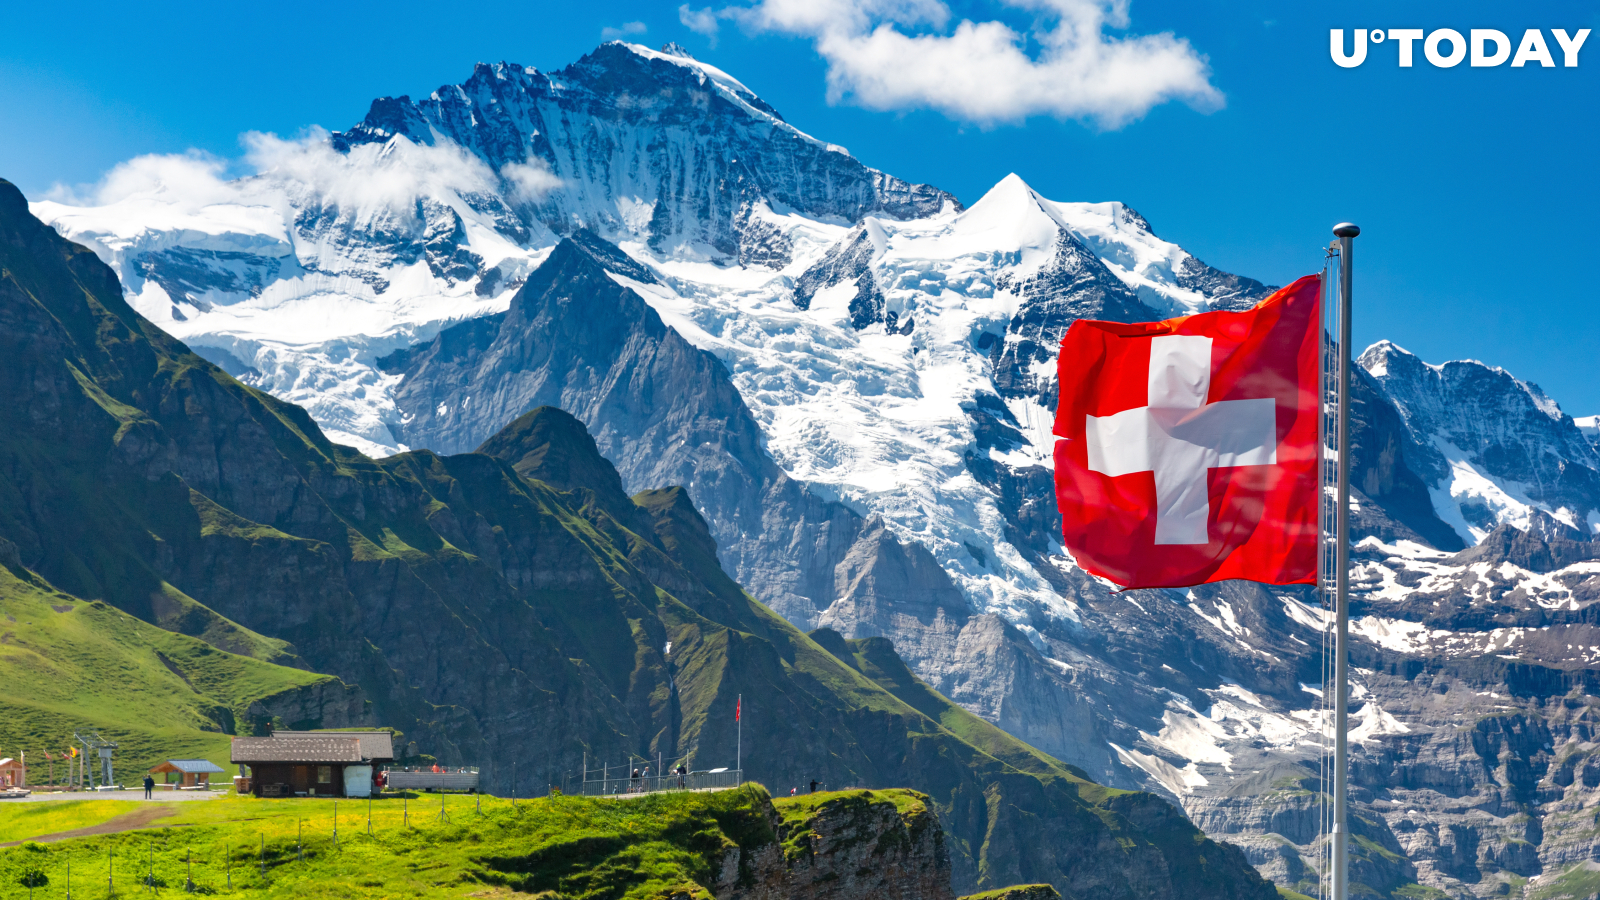 Bitcoin and Tether Become "De Facto" Legal Tender in Swiss Town 